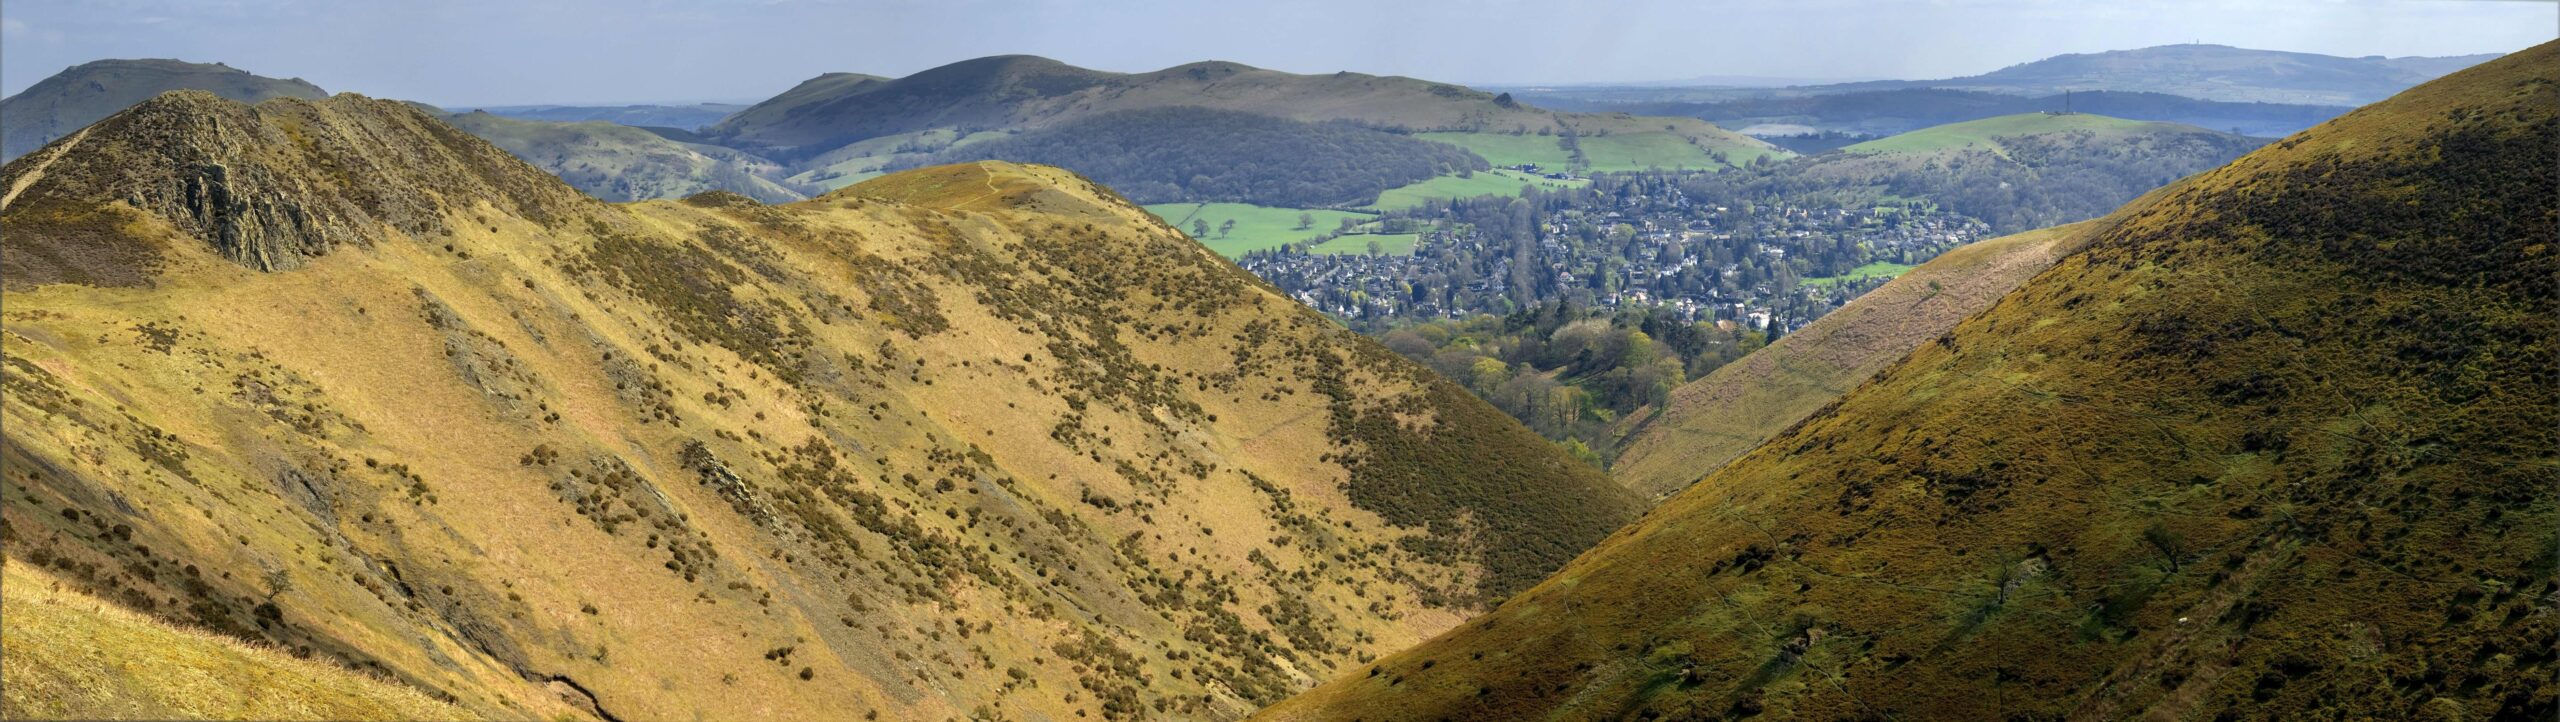 Exploring the Charm of the Shropshire Hills from the doorstep of Mynd House Bed & Breakfast